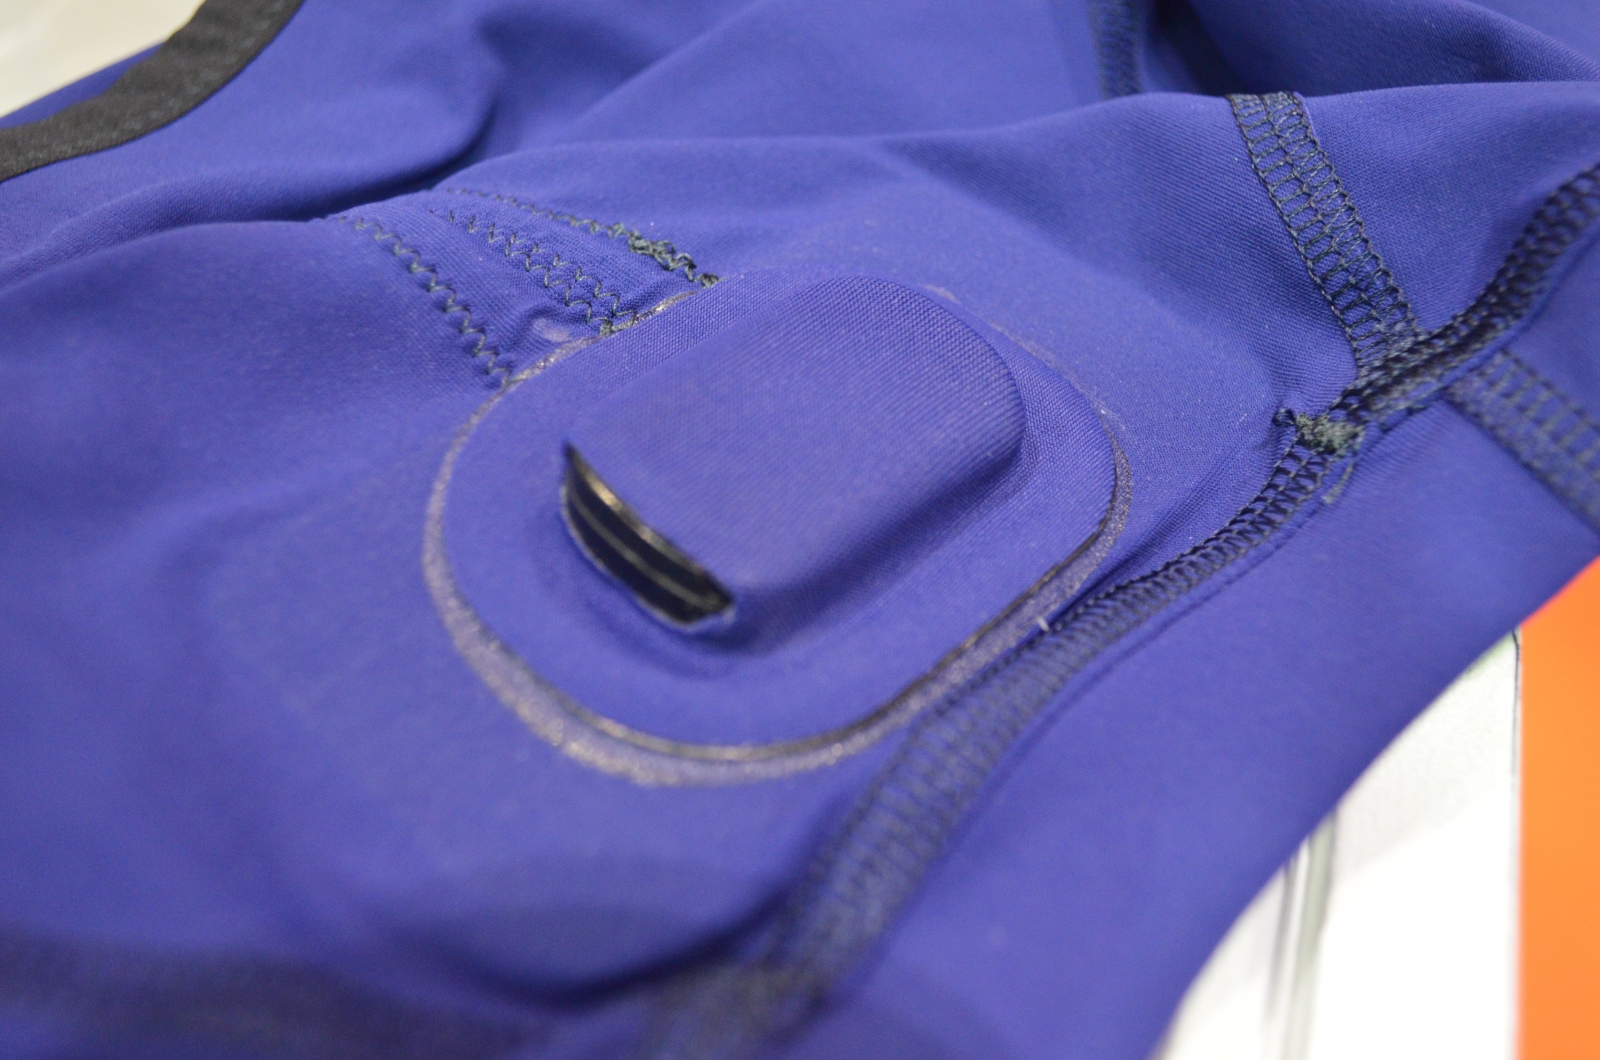 Wearables 2.0 - Sensors woven into clothing lead medical revolution